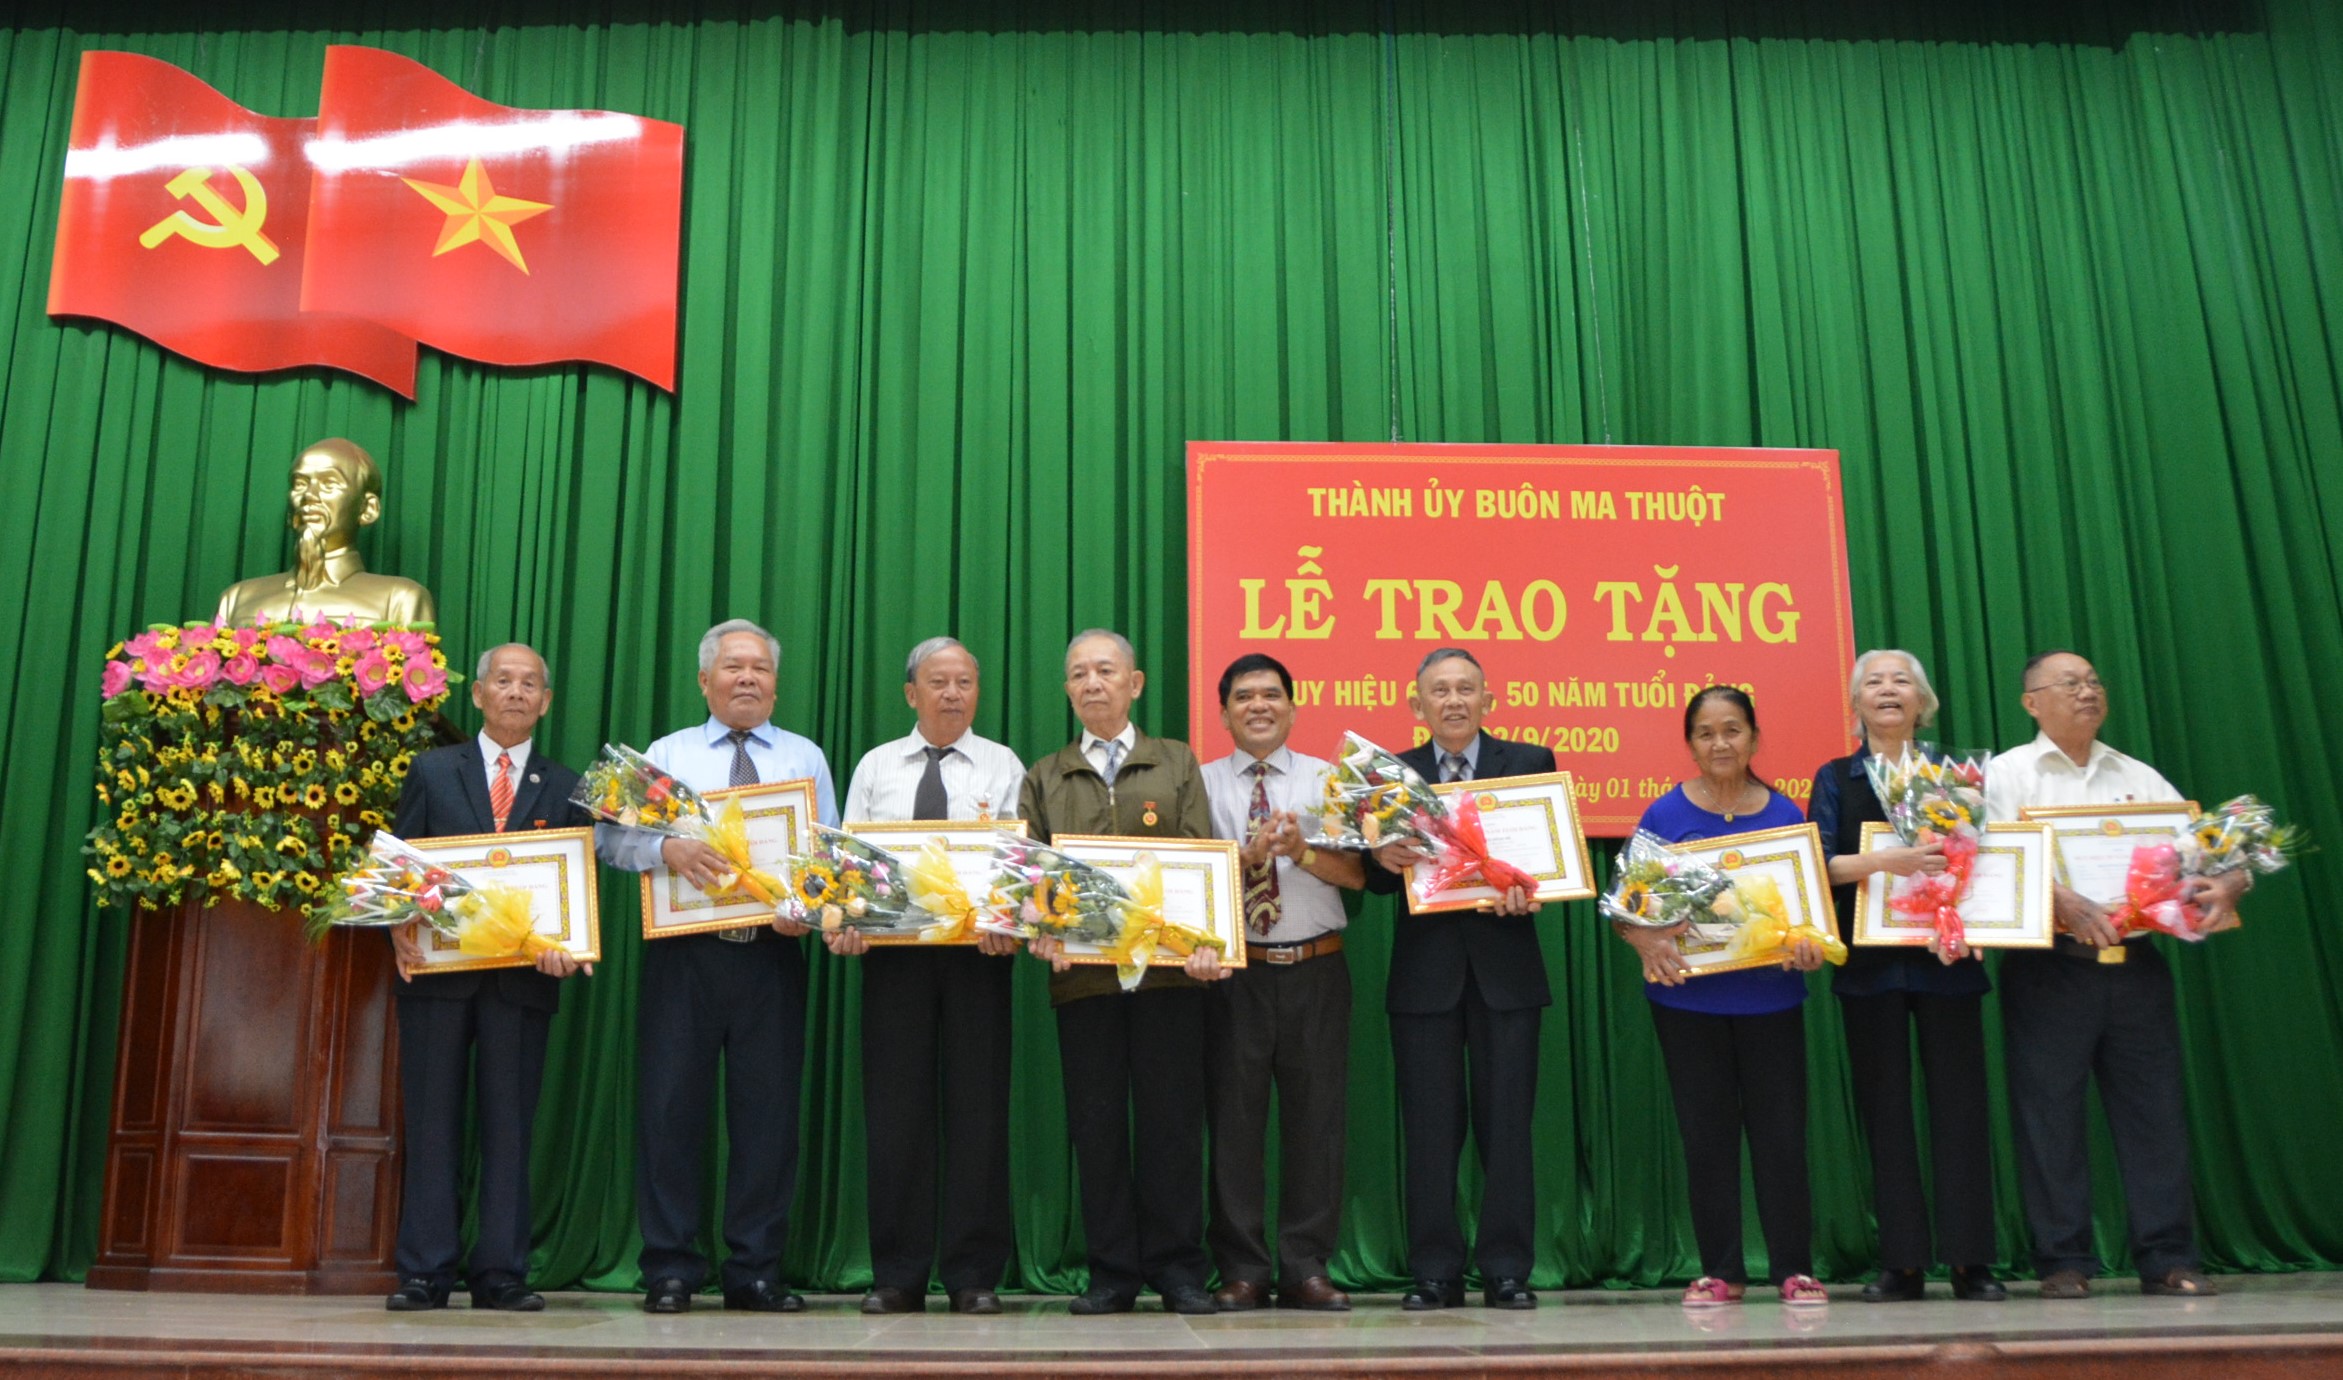 Presenting Party Badges to 36 Party members of BMT City Party Committee on September 2